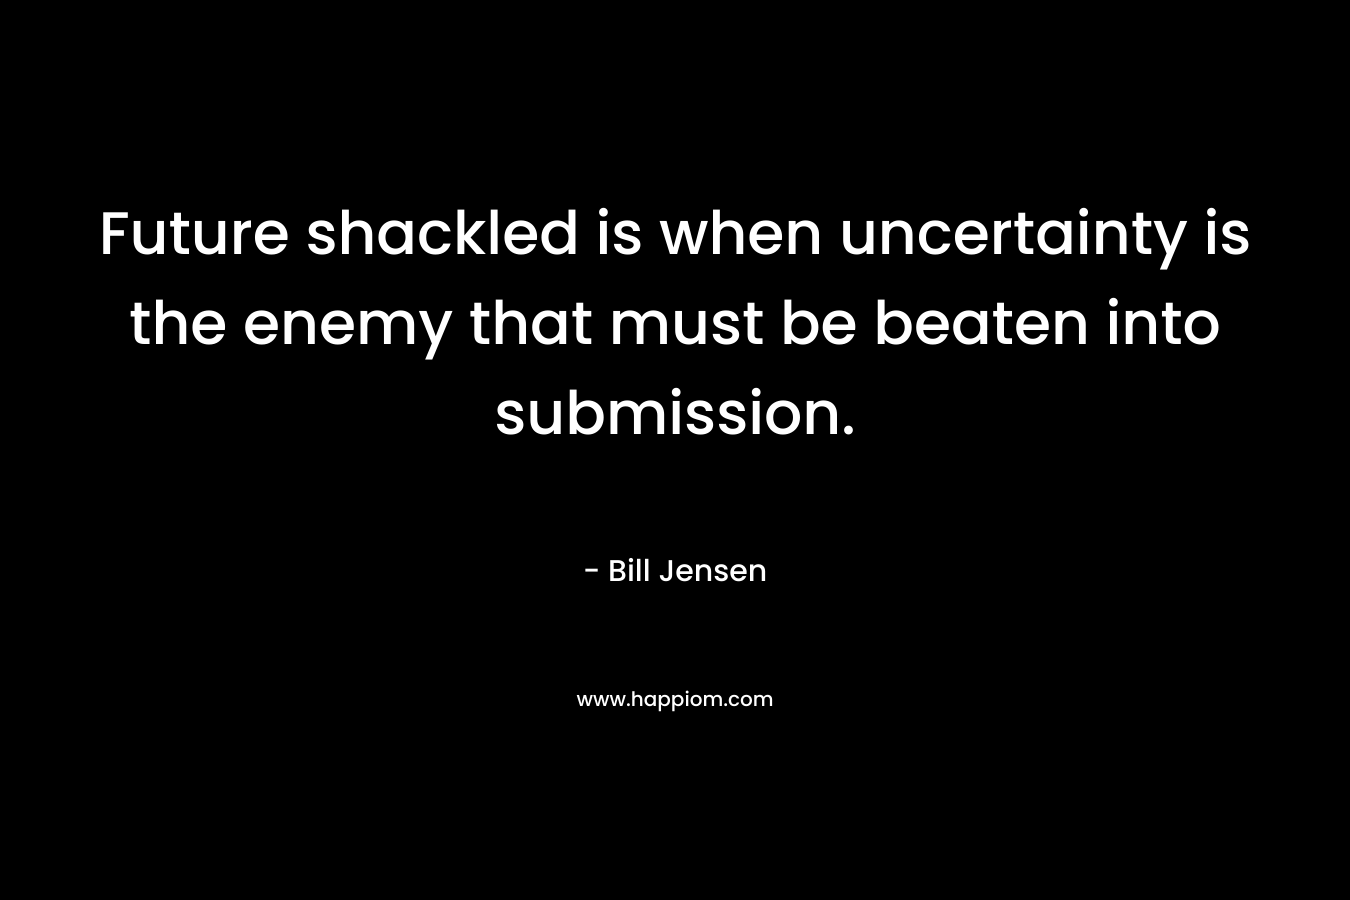 Future shackled is when uncertainty is the enemy that must be beaten into submission. – Bill Jensen